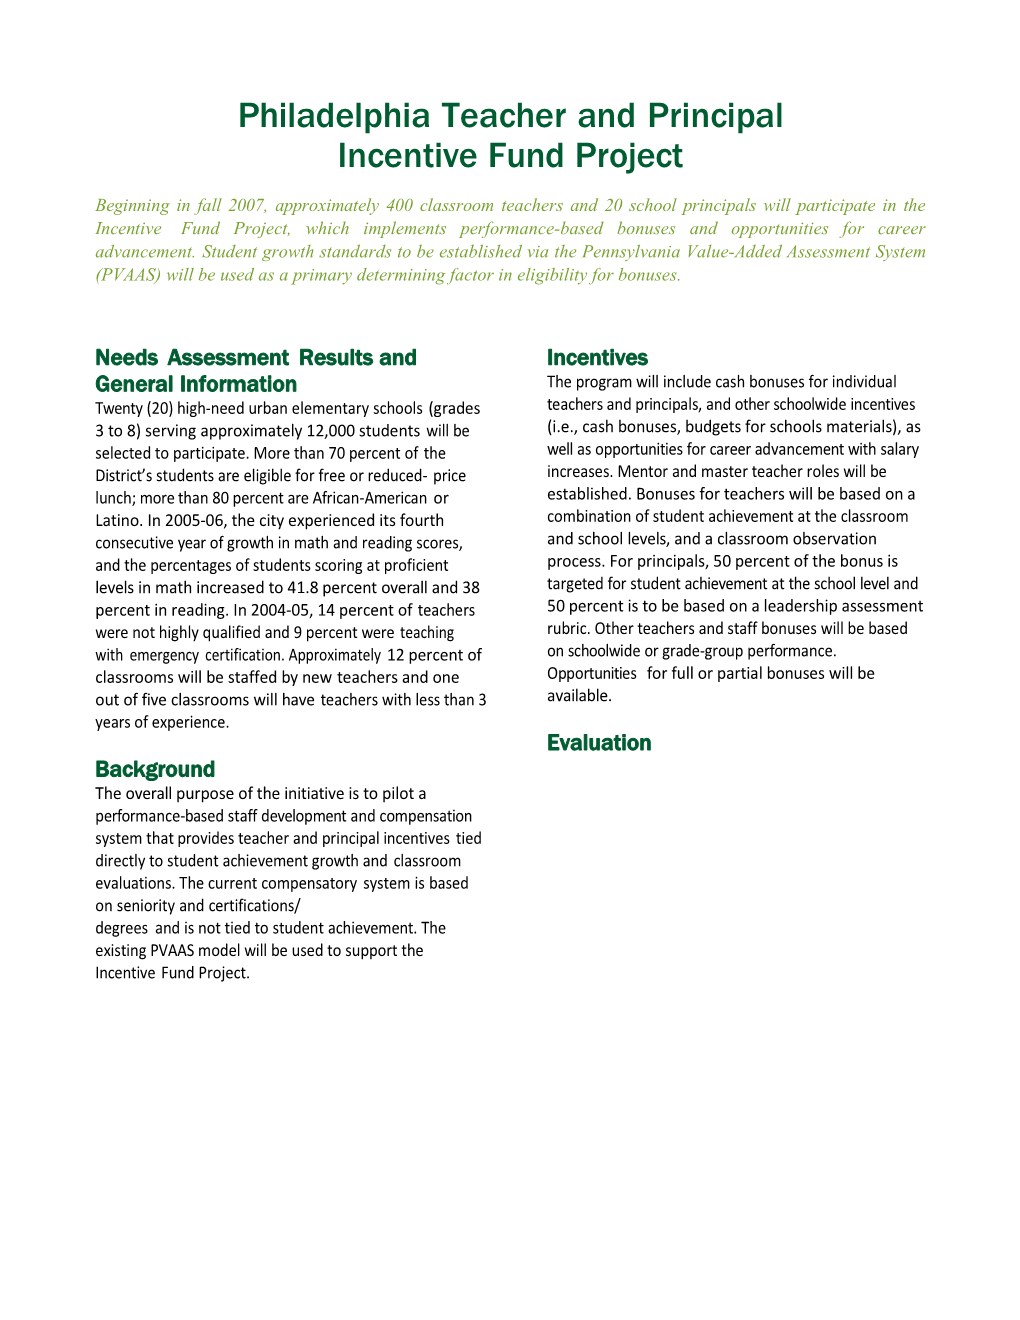 Philadelphia Teacher and Principal Incentive Fund Project (MS Word)